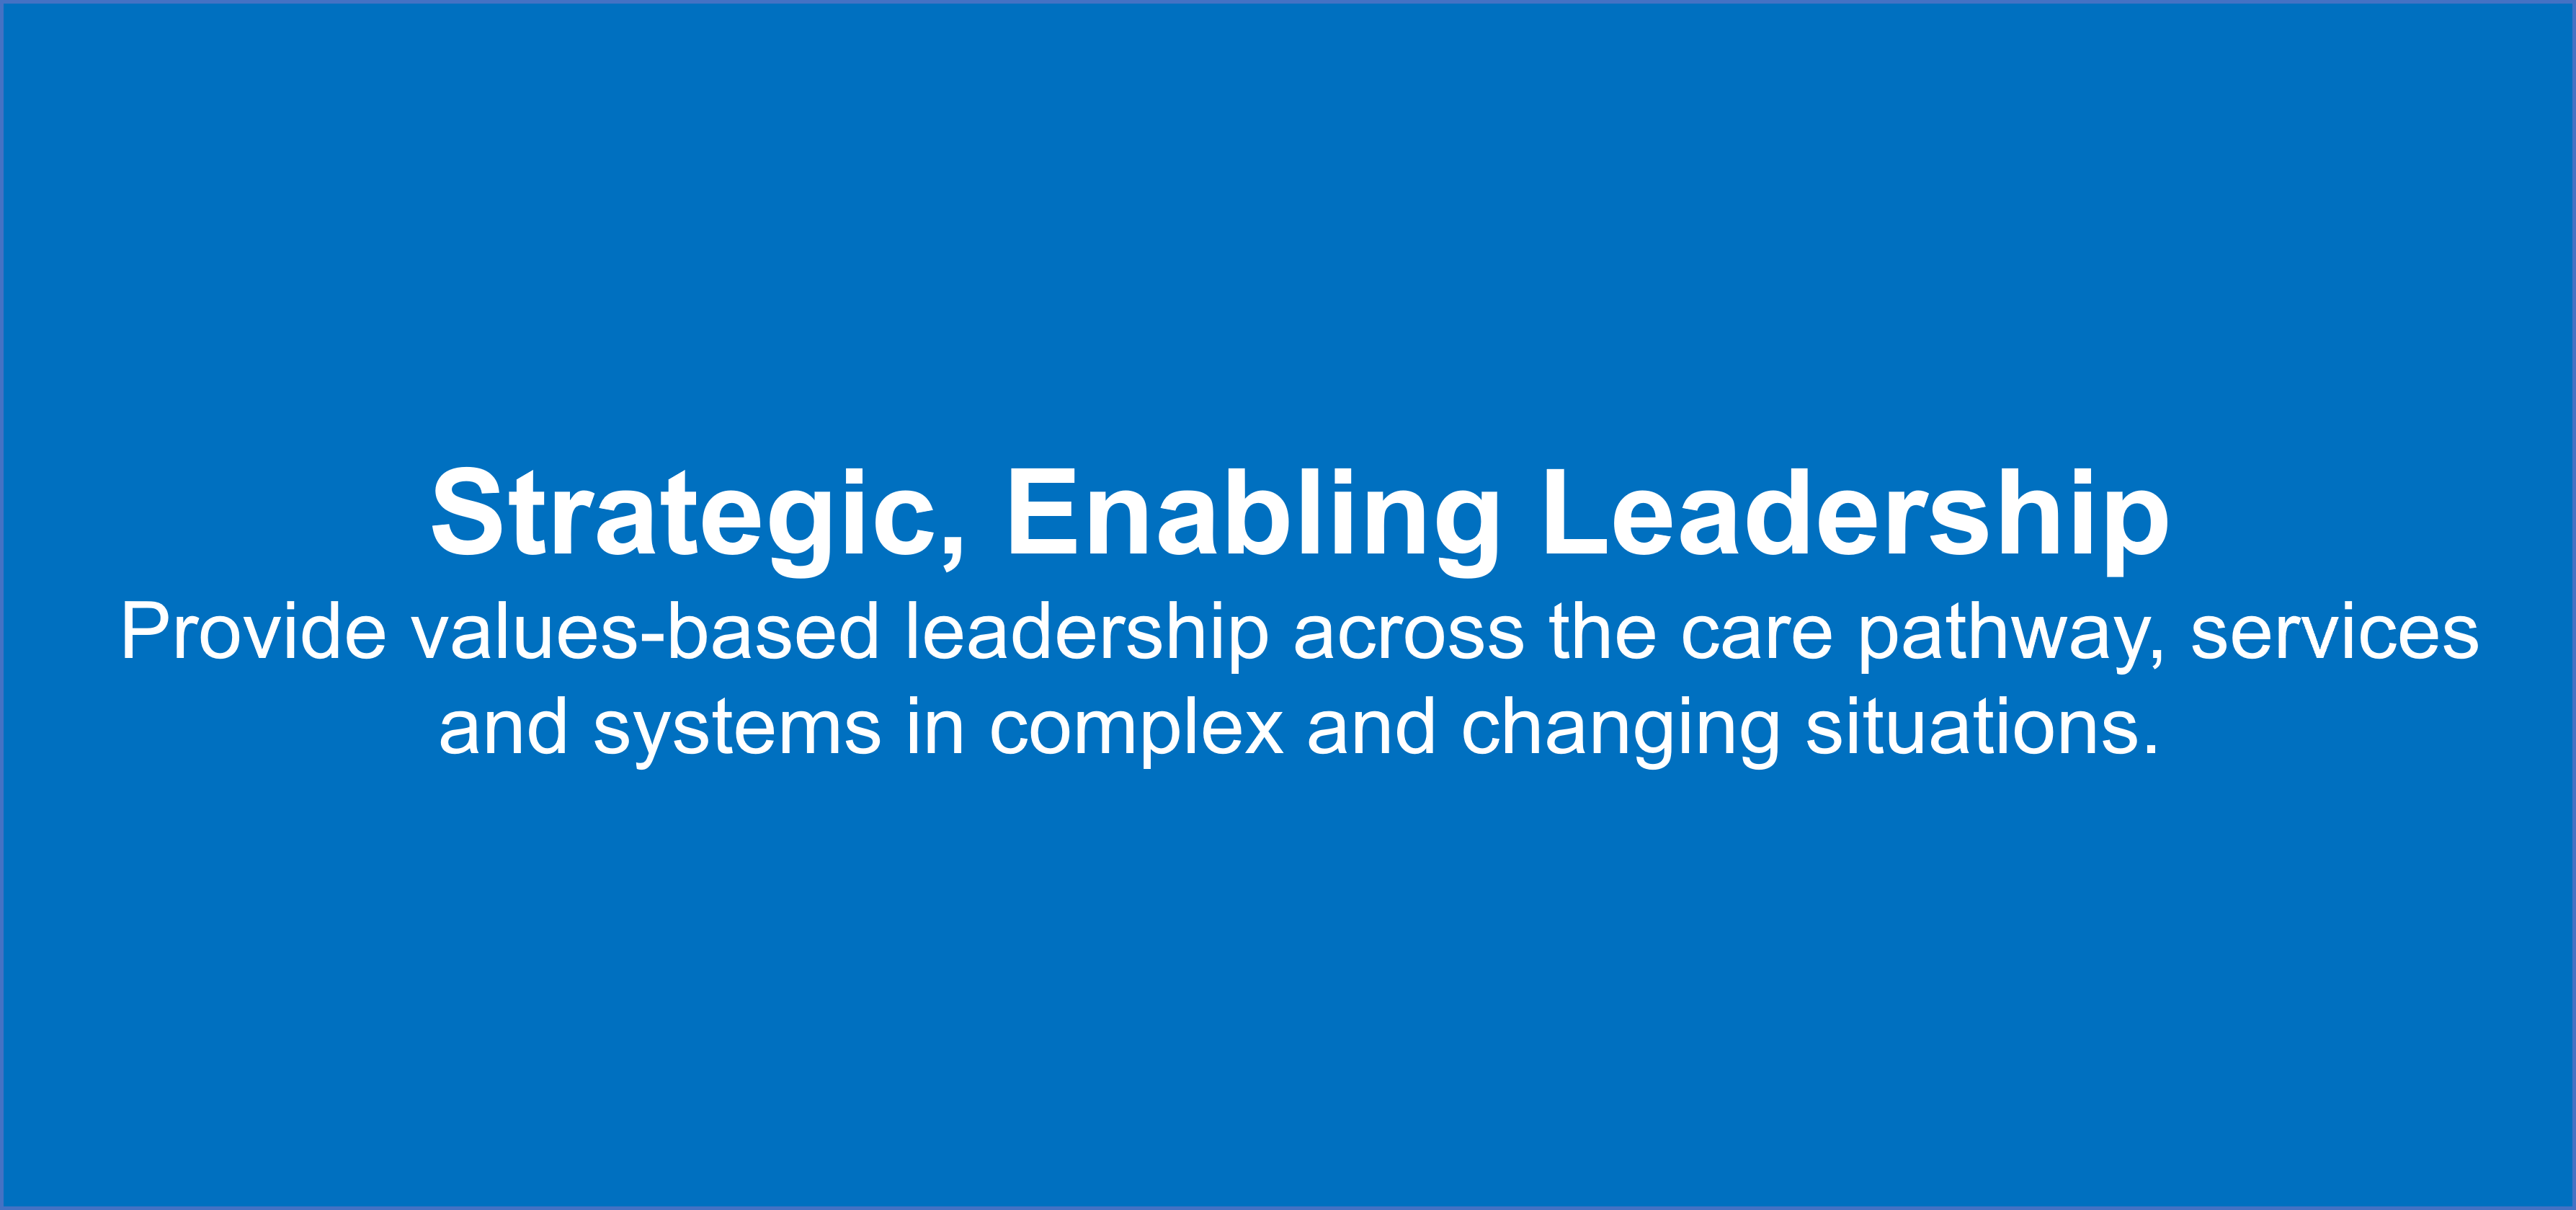 Consultant - Strategic, Enabling Leadership
Provide values-based leadership across the care pathway, services and systems in complex and changing situations.
